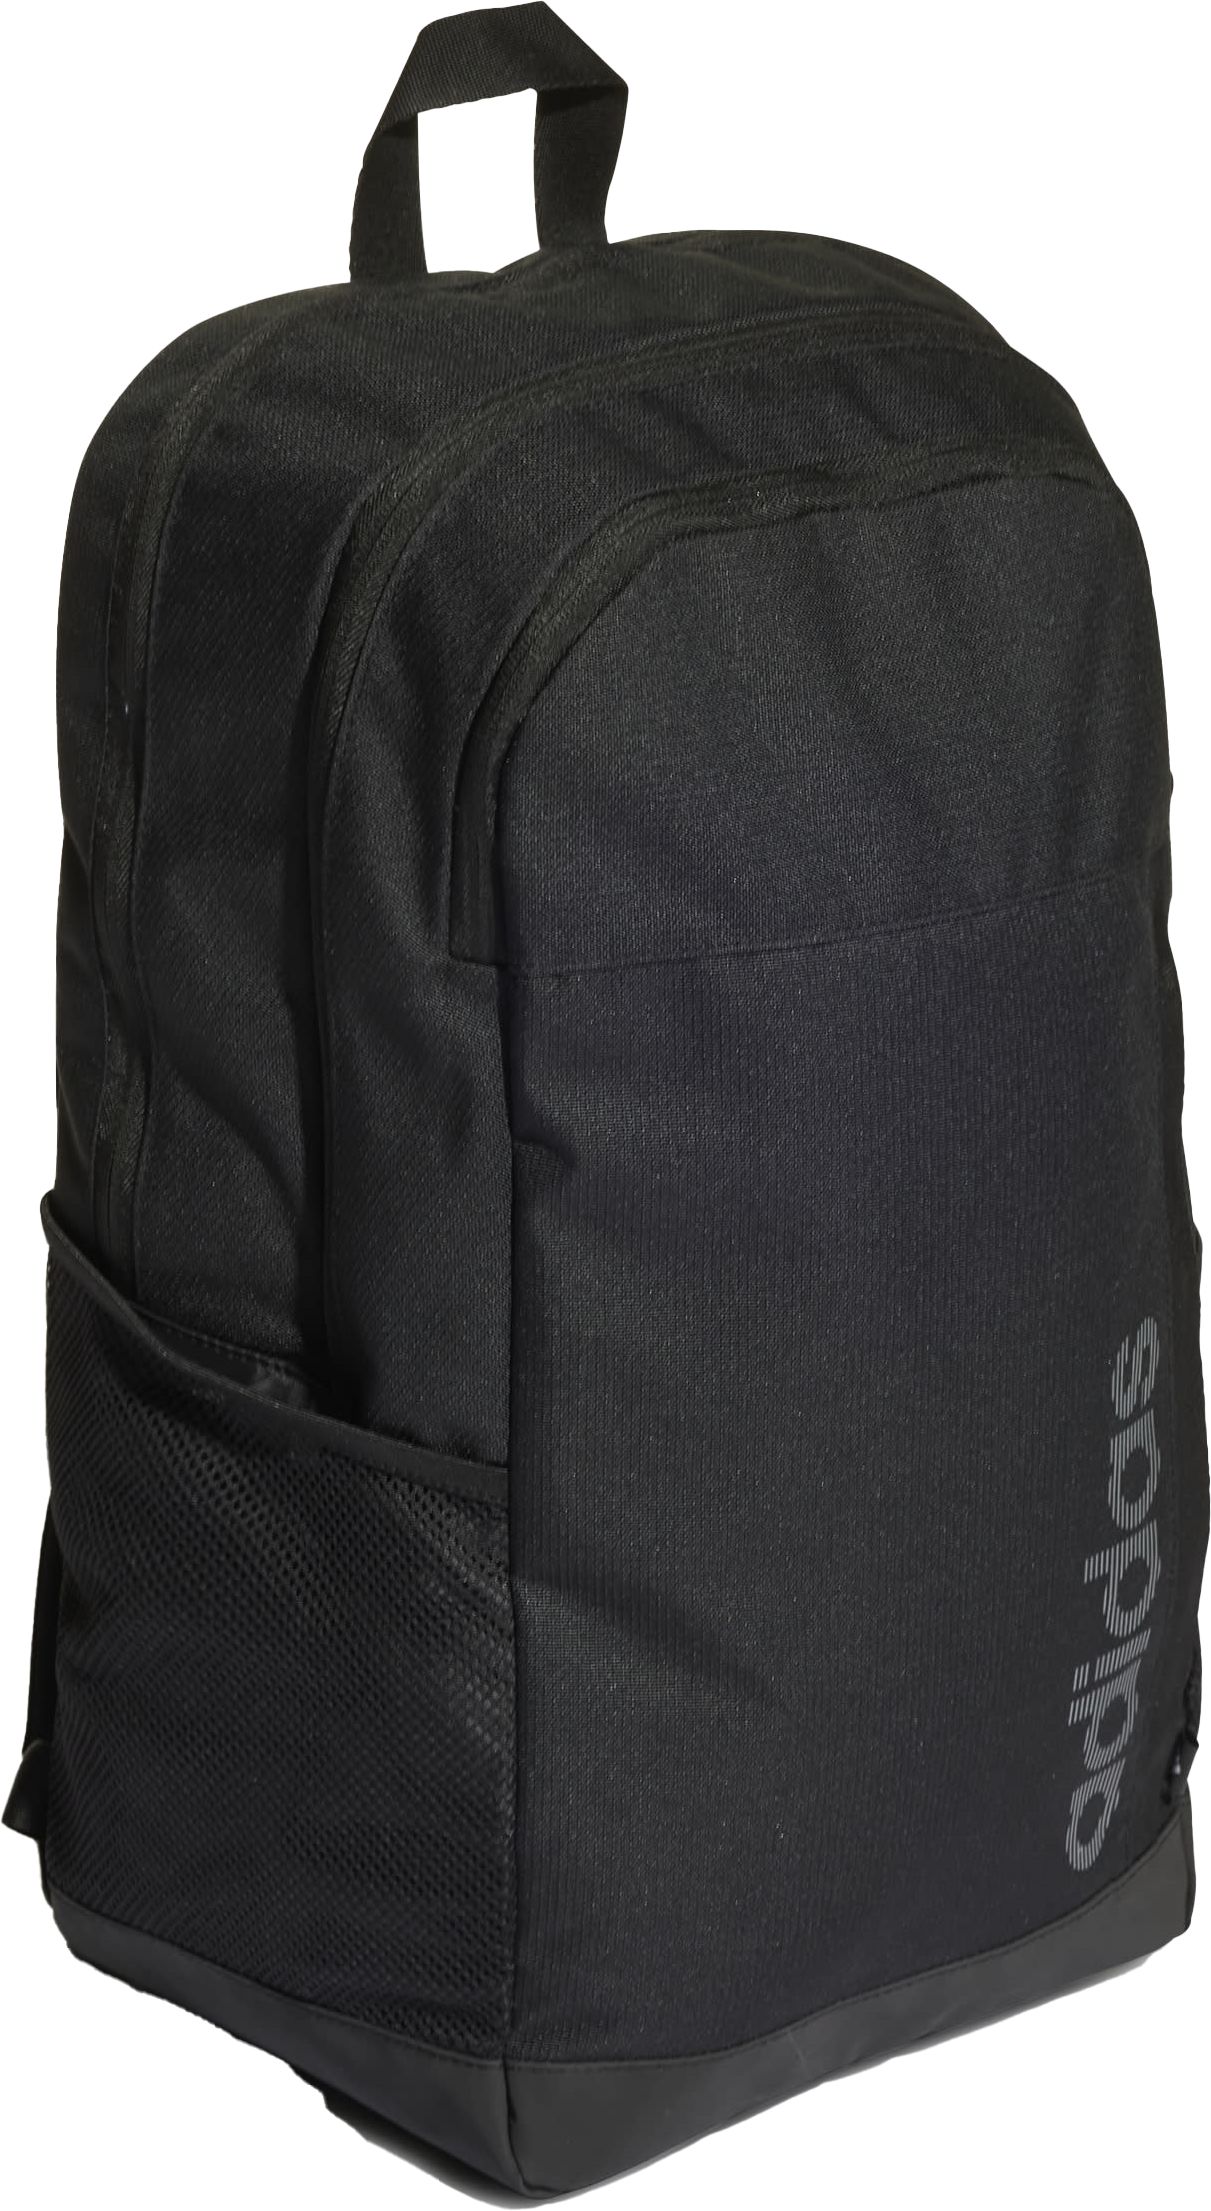 ADIDAS, Motion Linear Backpack